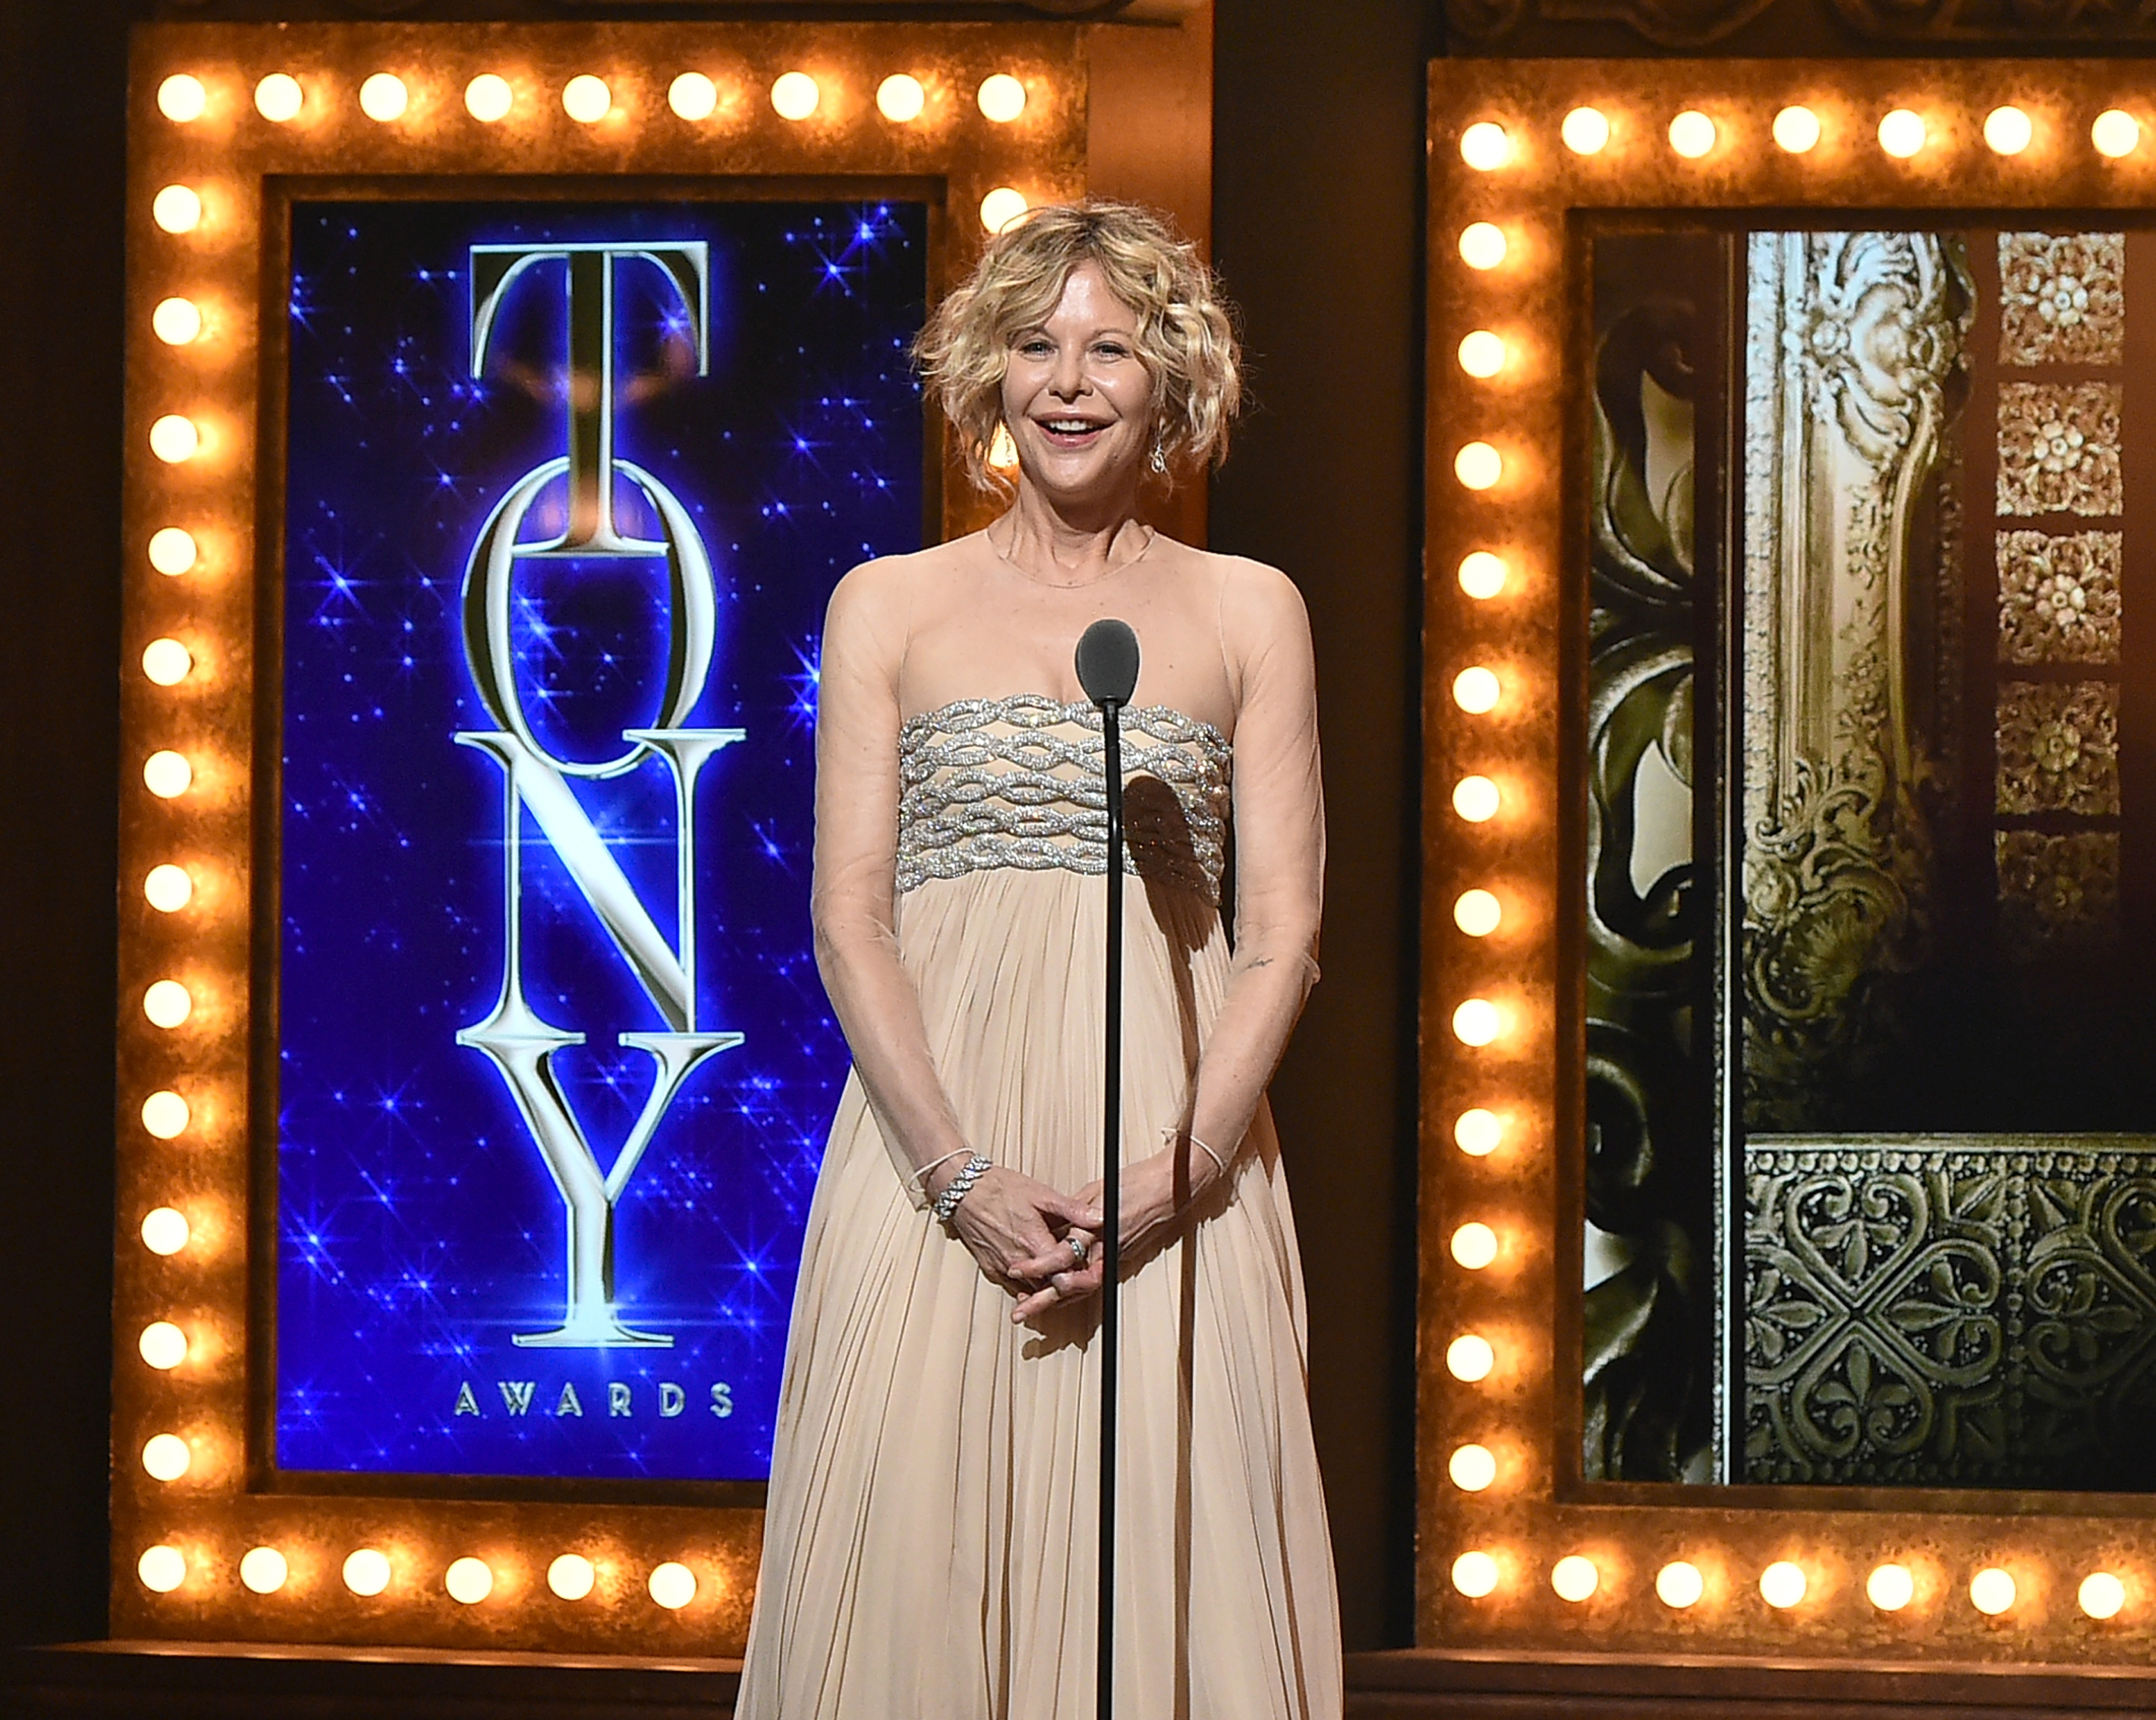 Meg Ryan besucht die 70th Annual Tony Awards am 12. Juni 2016 in New York City | Quelle: Getty Images